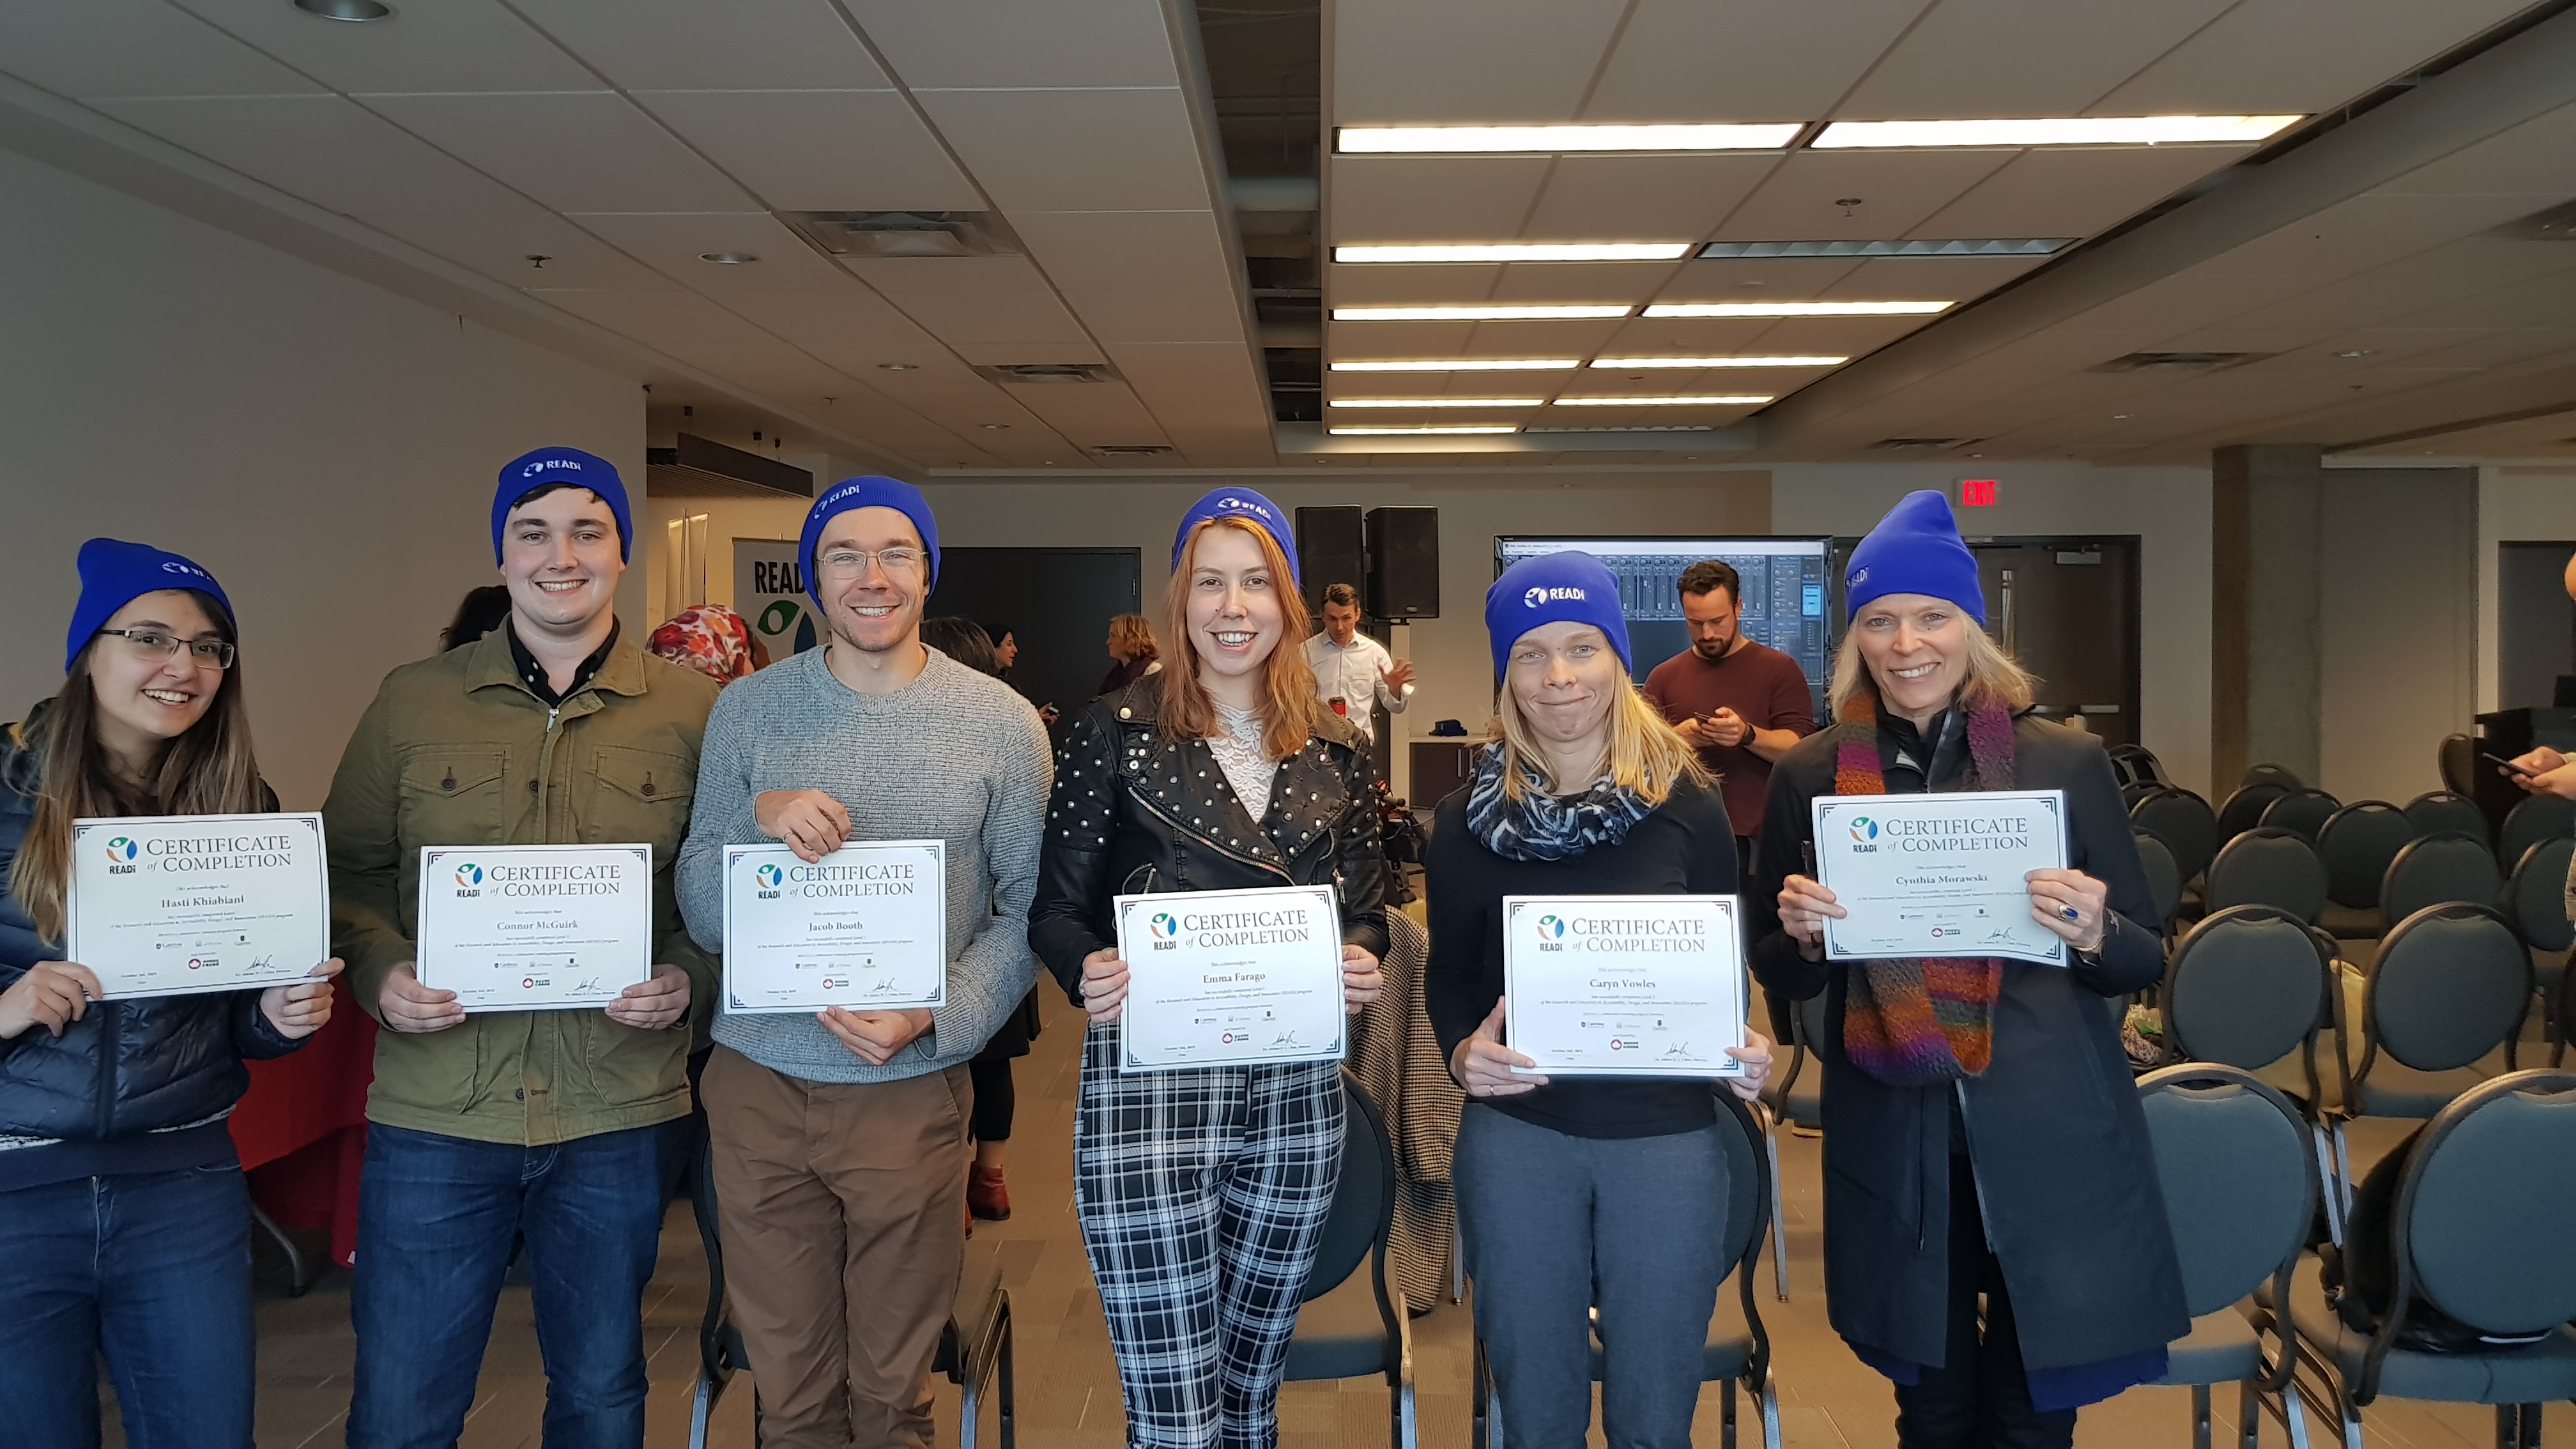 Six students pose, holding their READi certificates and wearing blue READi bieanies.